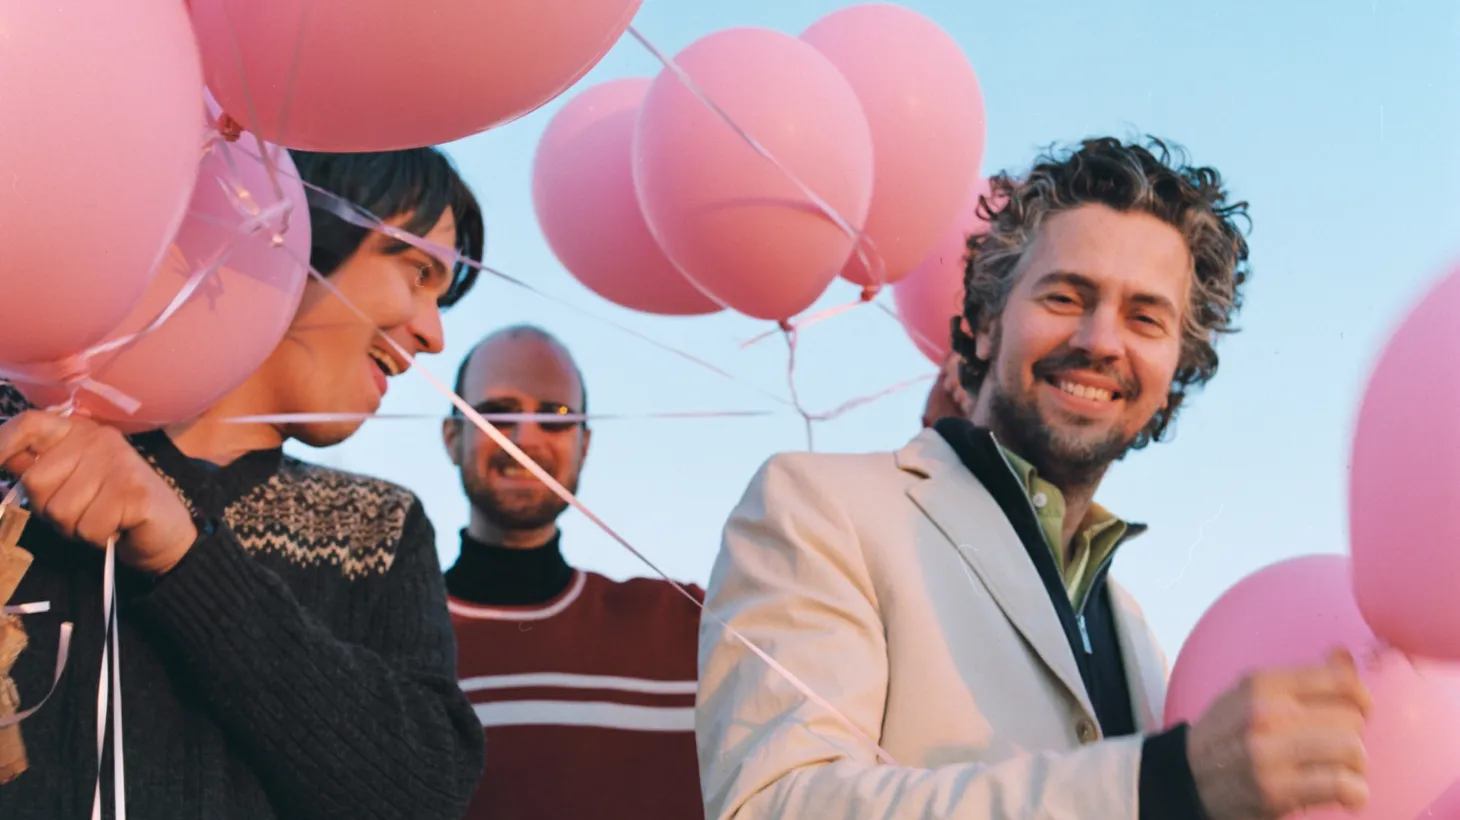 Yoshimi Battles the Pink Robots is The Flaming Lips’ masterpiece recording, and you’ll be able to hear it in its entirety when the band comes to play the YouTube Theater in Los Angeles in August.